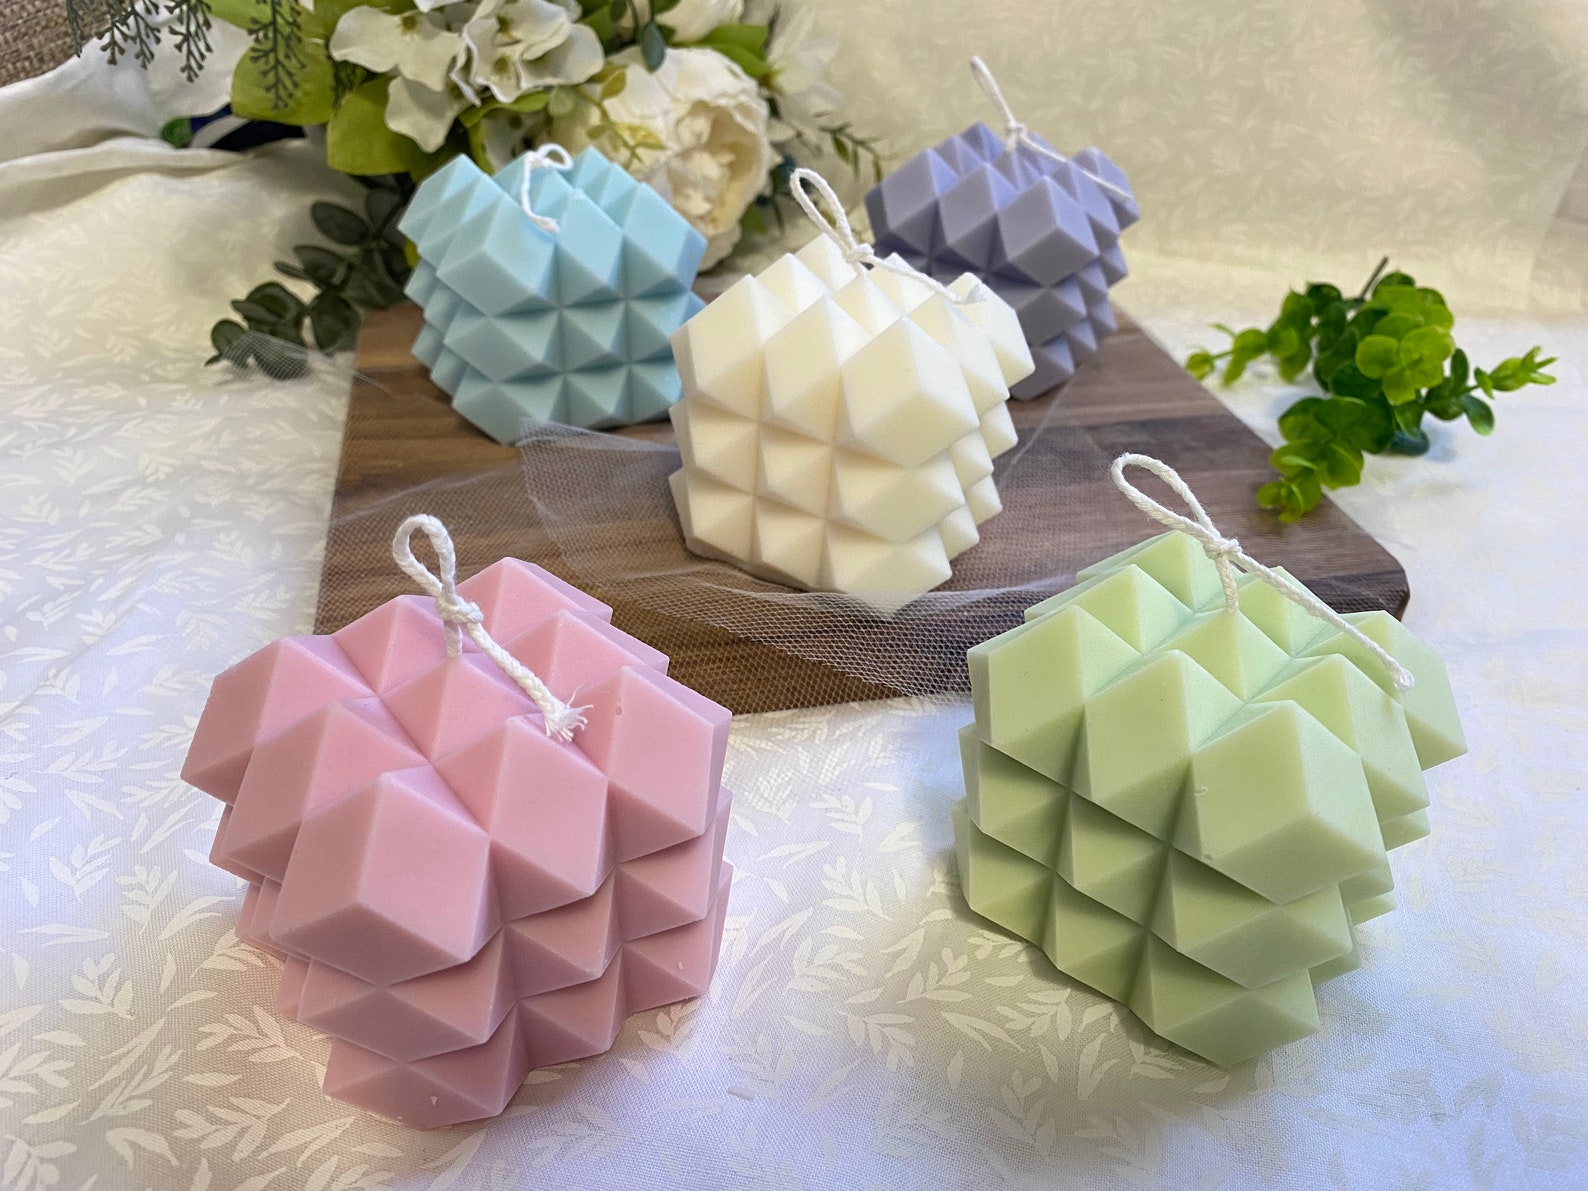 Spike Cube Sculpted Pastel Aroma soy wax Candle - Set of 5